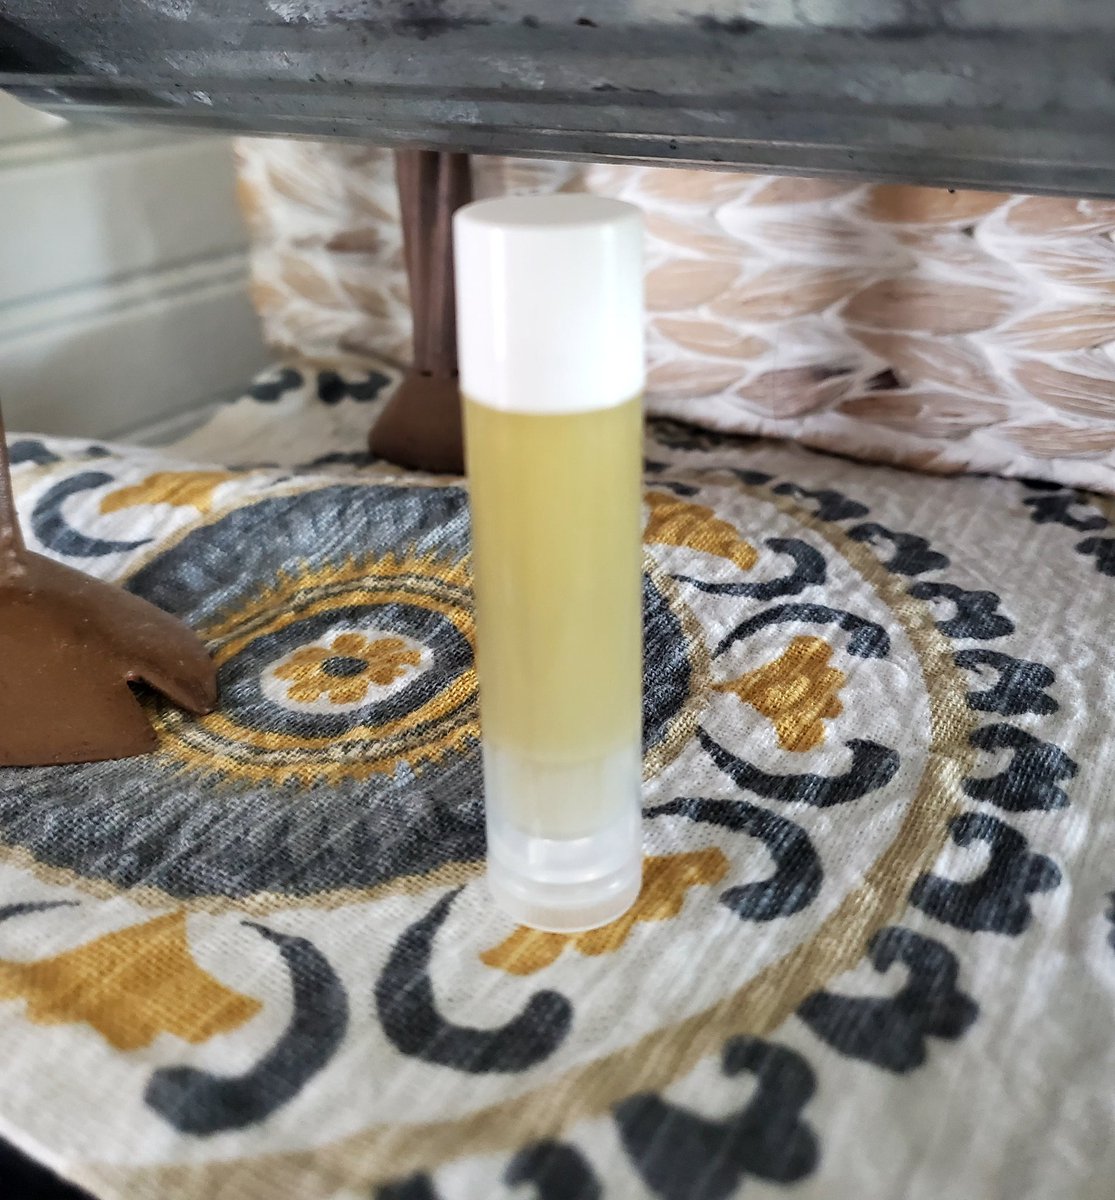 I made some bug bite sticks.
These have plantain, lemon balm, purple dead nettle, bentonite clay, olive oil, beeswax, and bentonite clay. 
Both of the girls have the worst reaction to mosquito bites. The chapstick tubes will make for easier application.